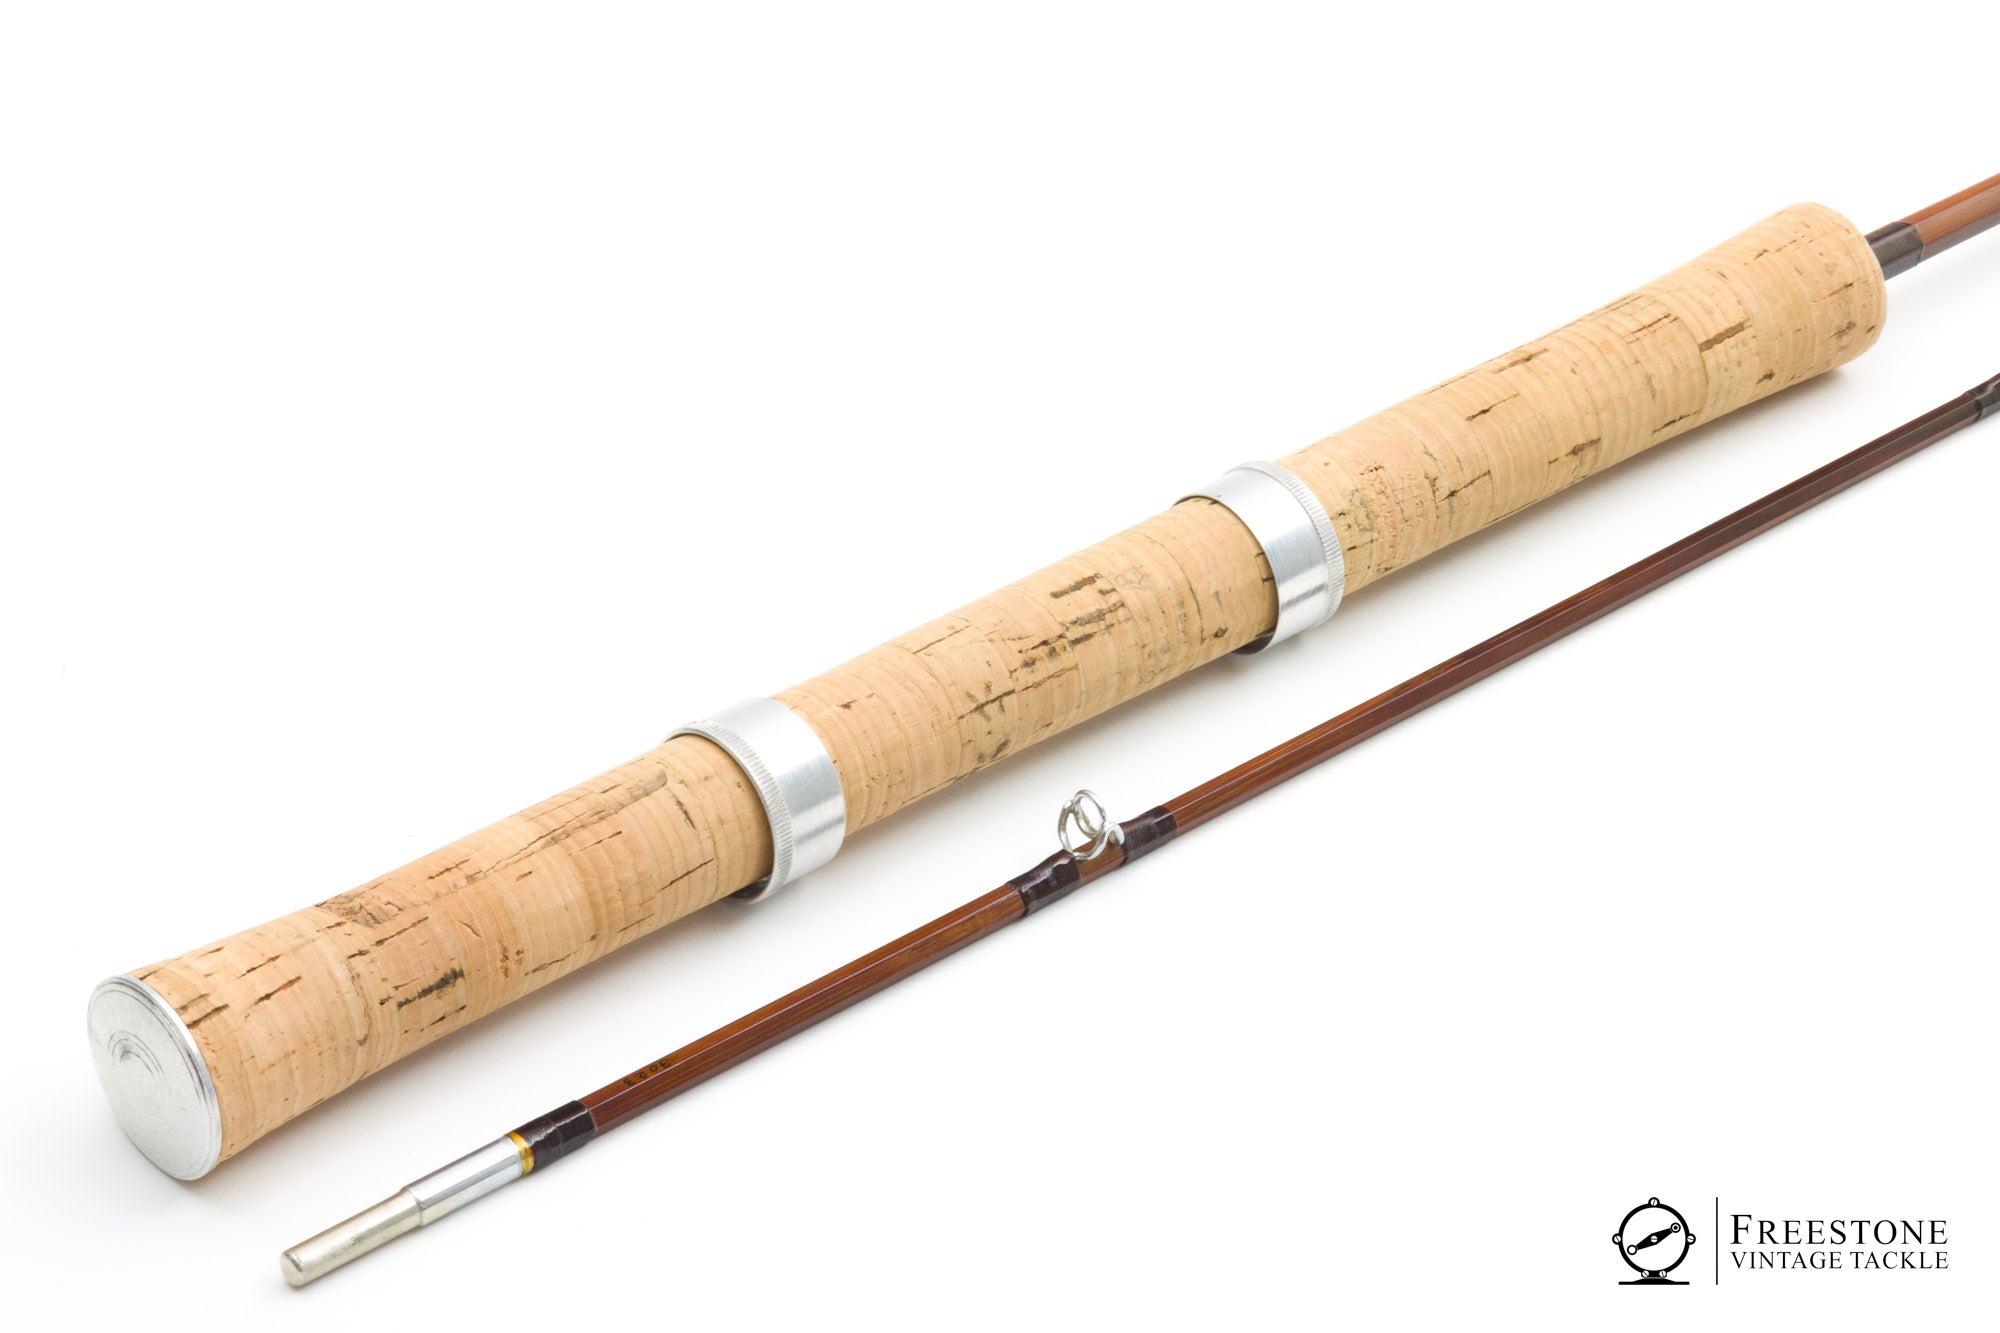 Orvis - 7' 2-piece Bamboo Spinning Rod - Freestone Vintage Tackle